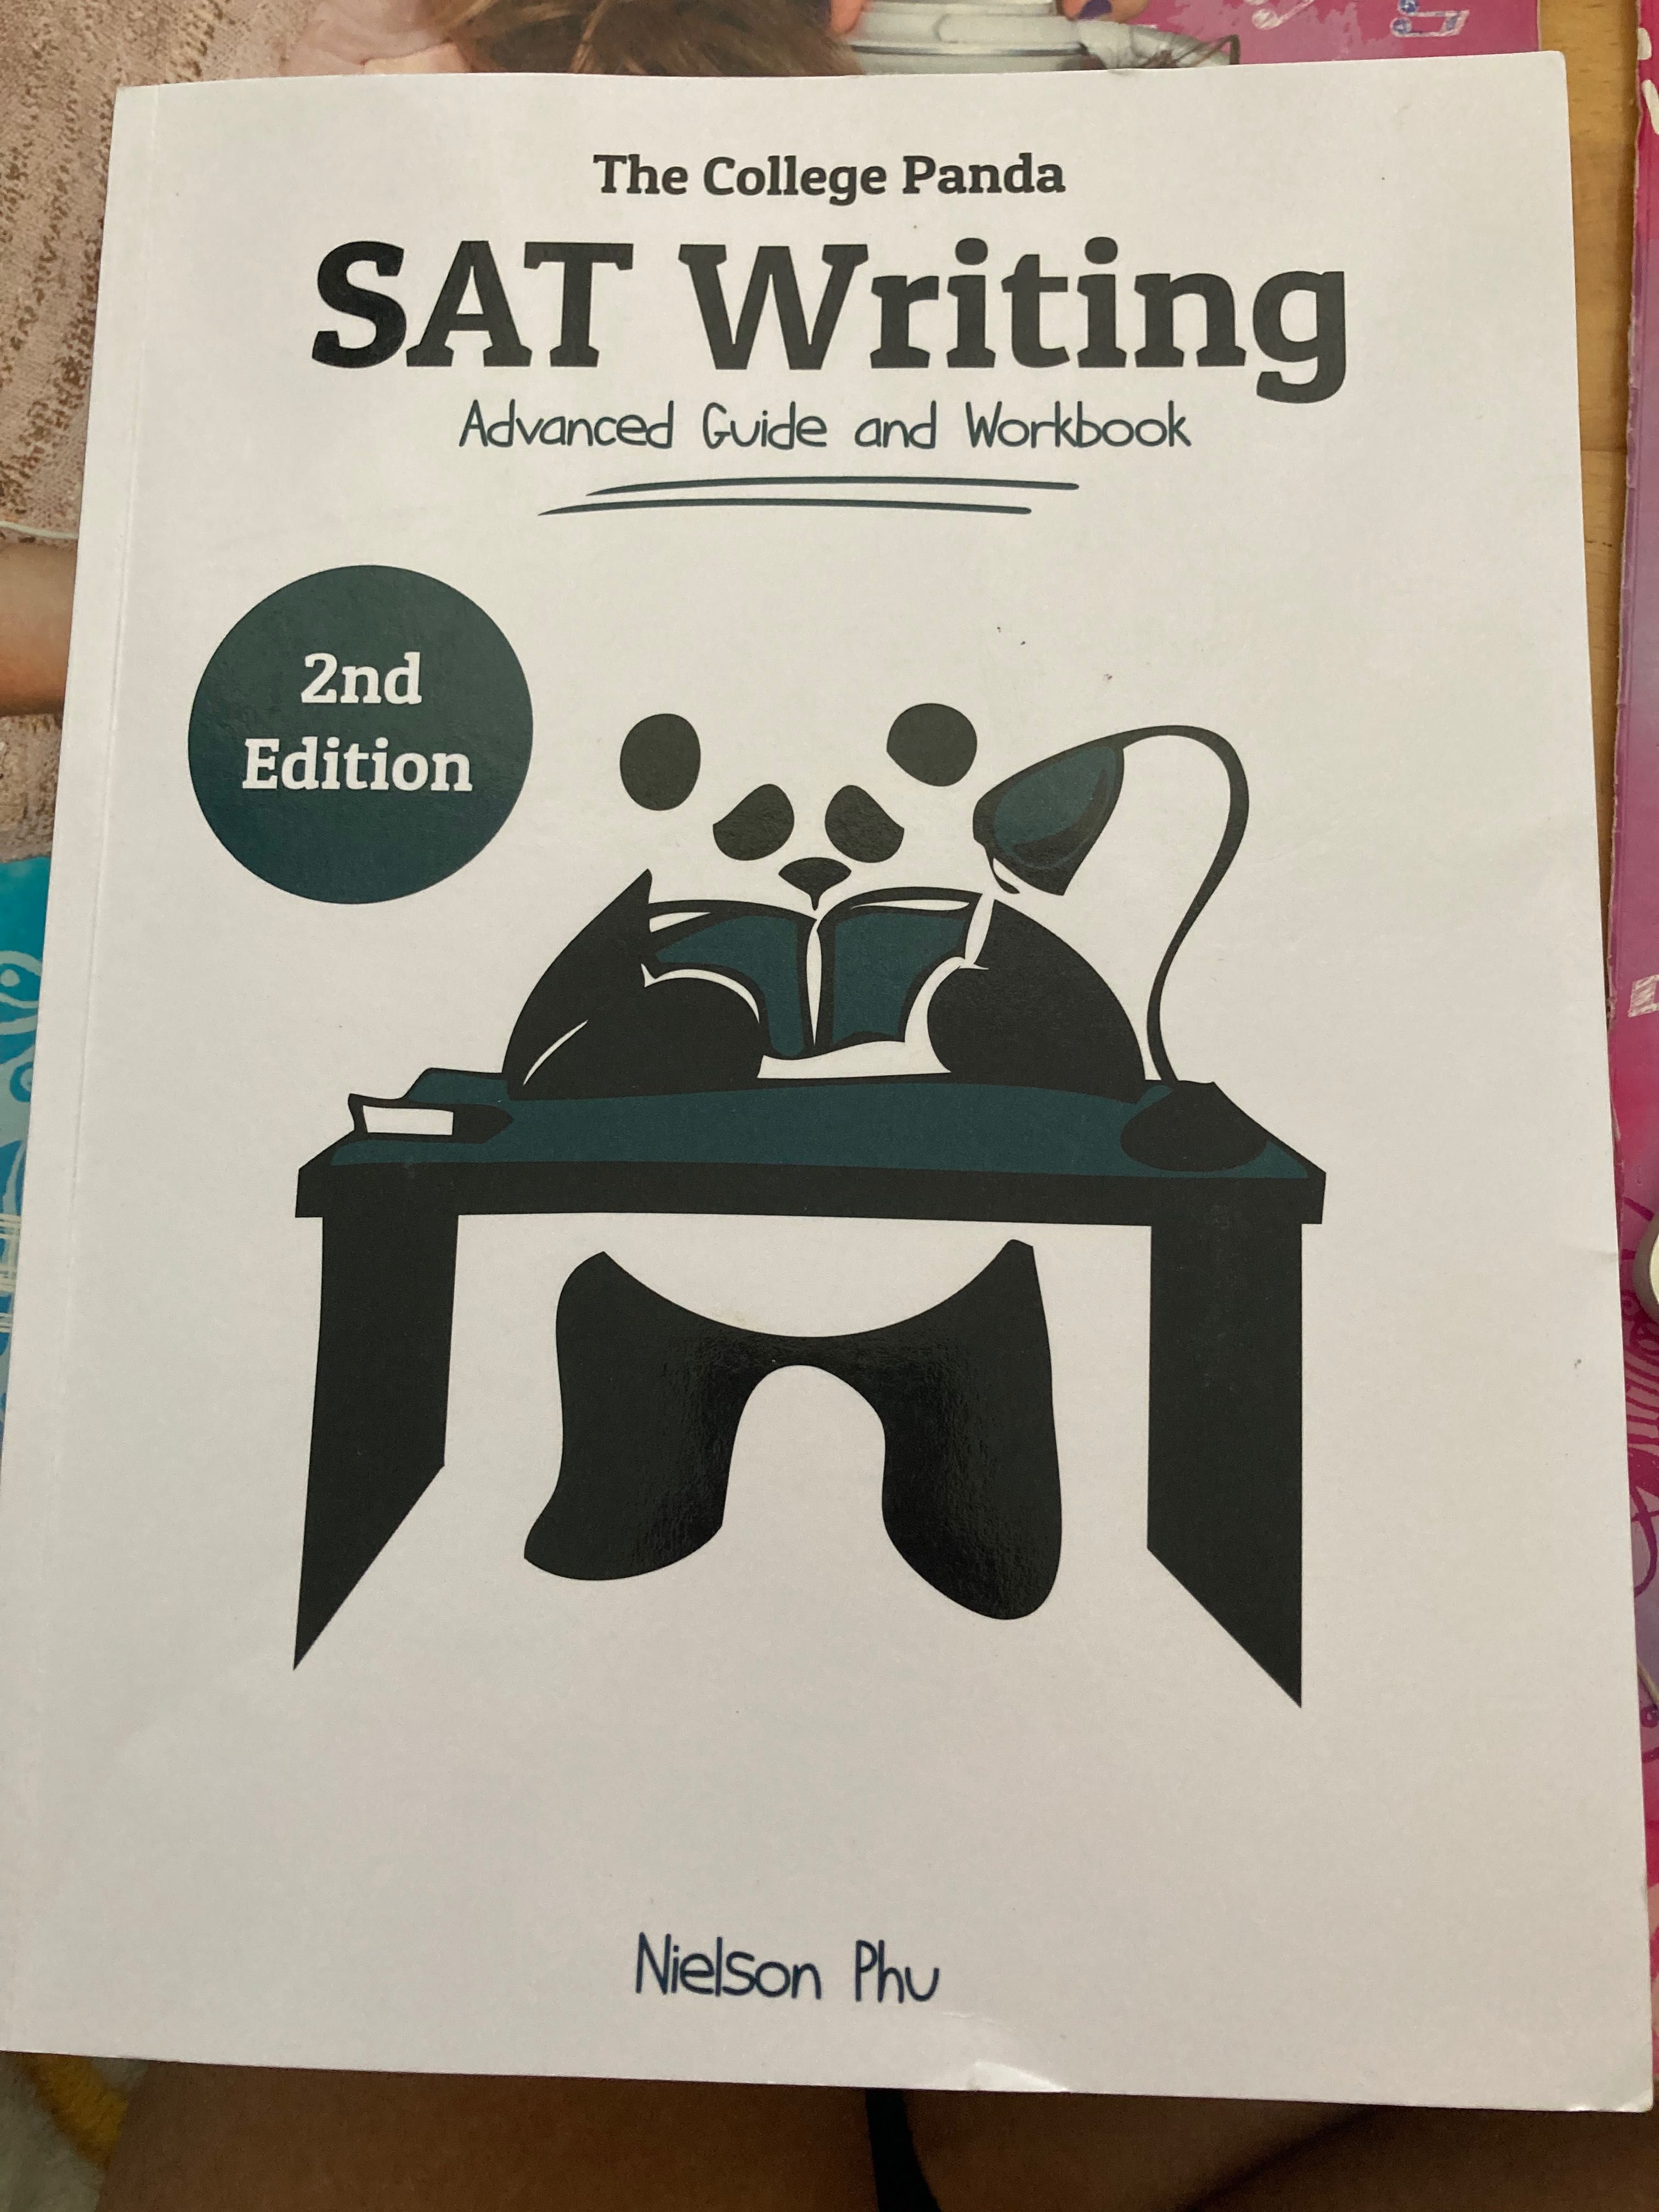 SAT Writing Advanced Guide and Workbook